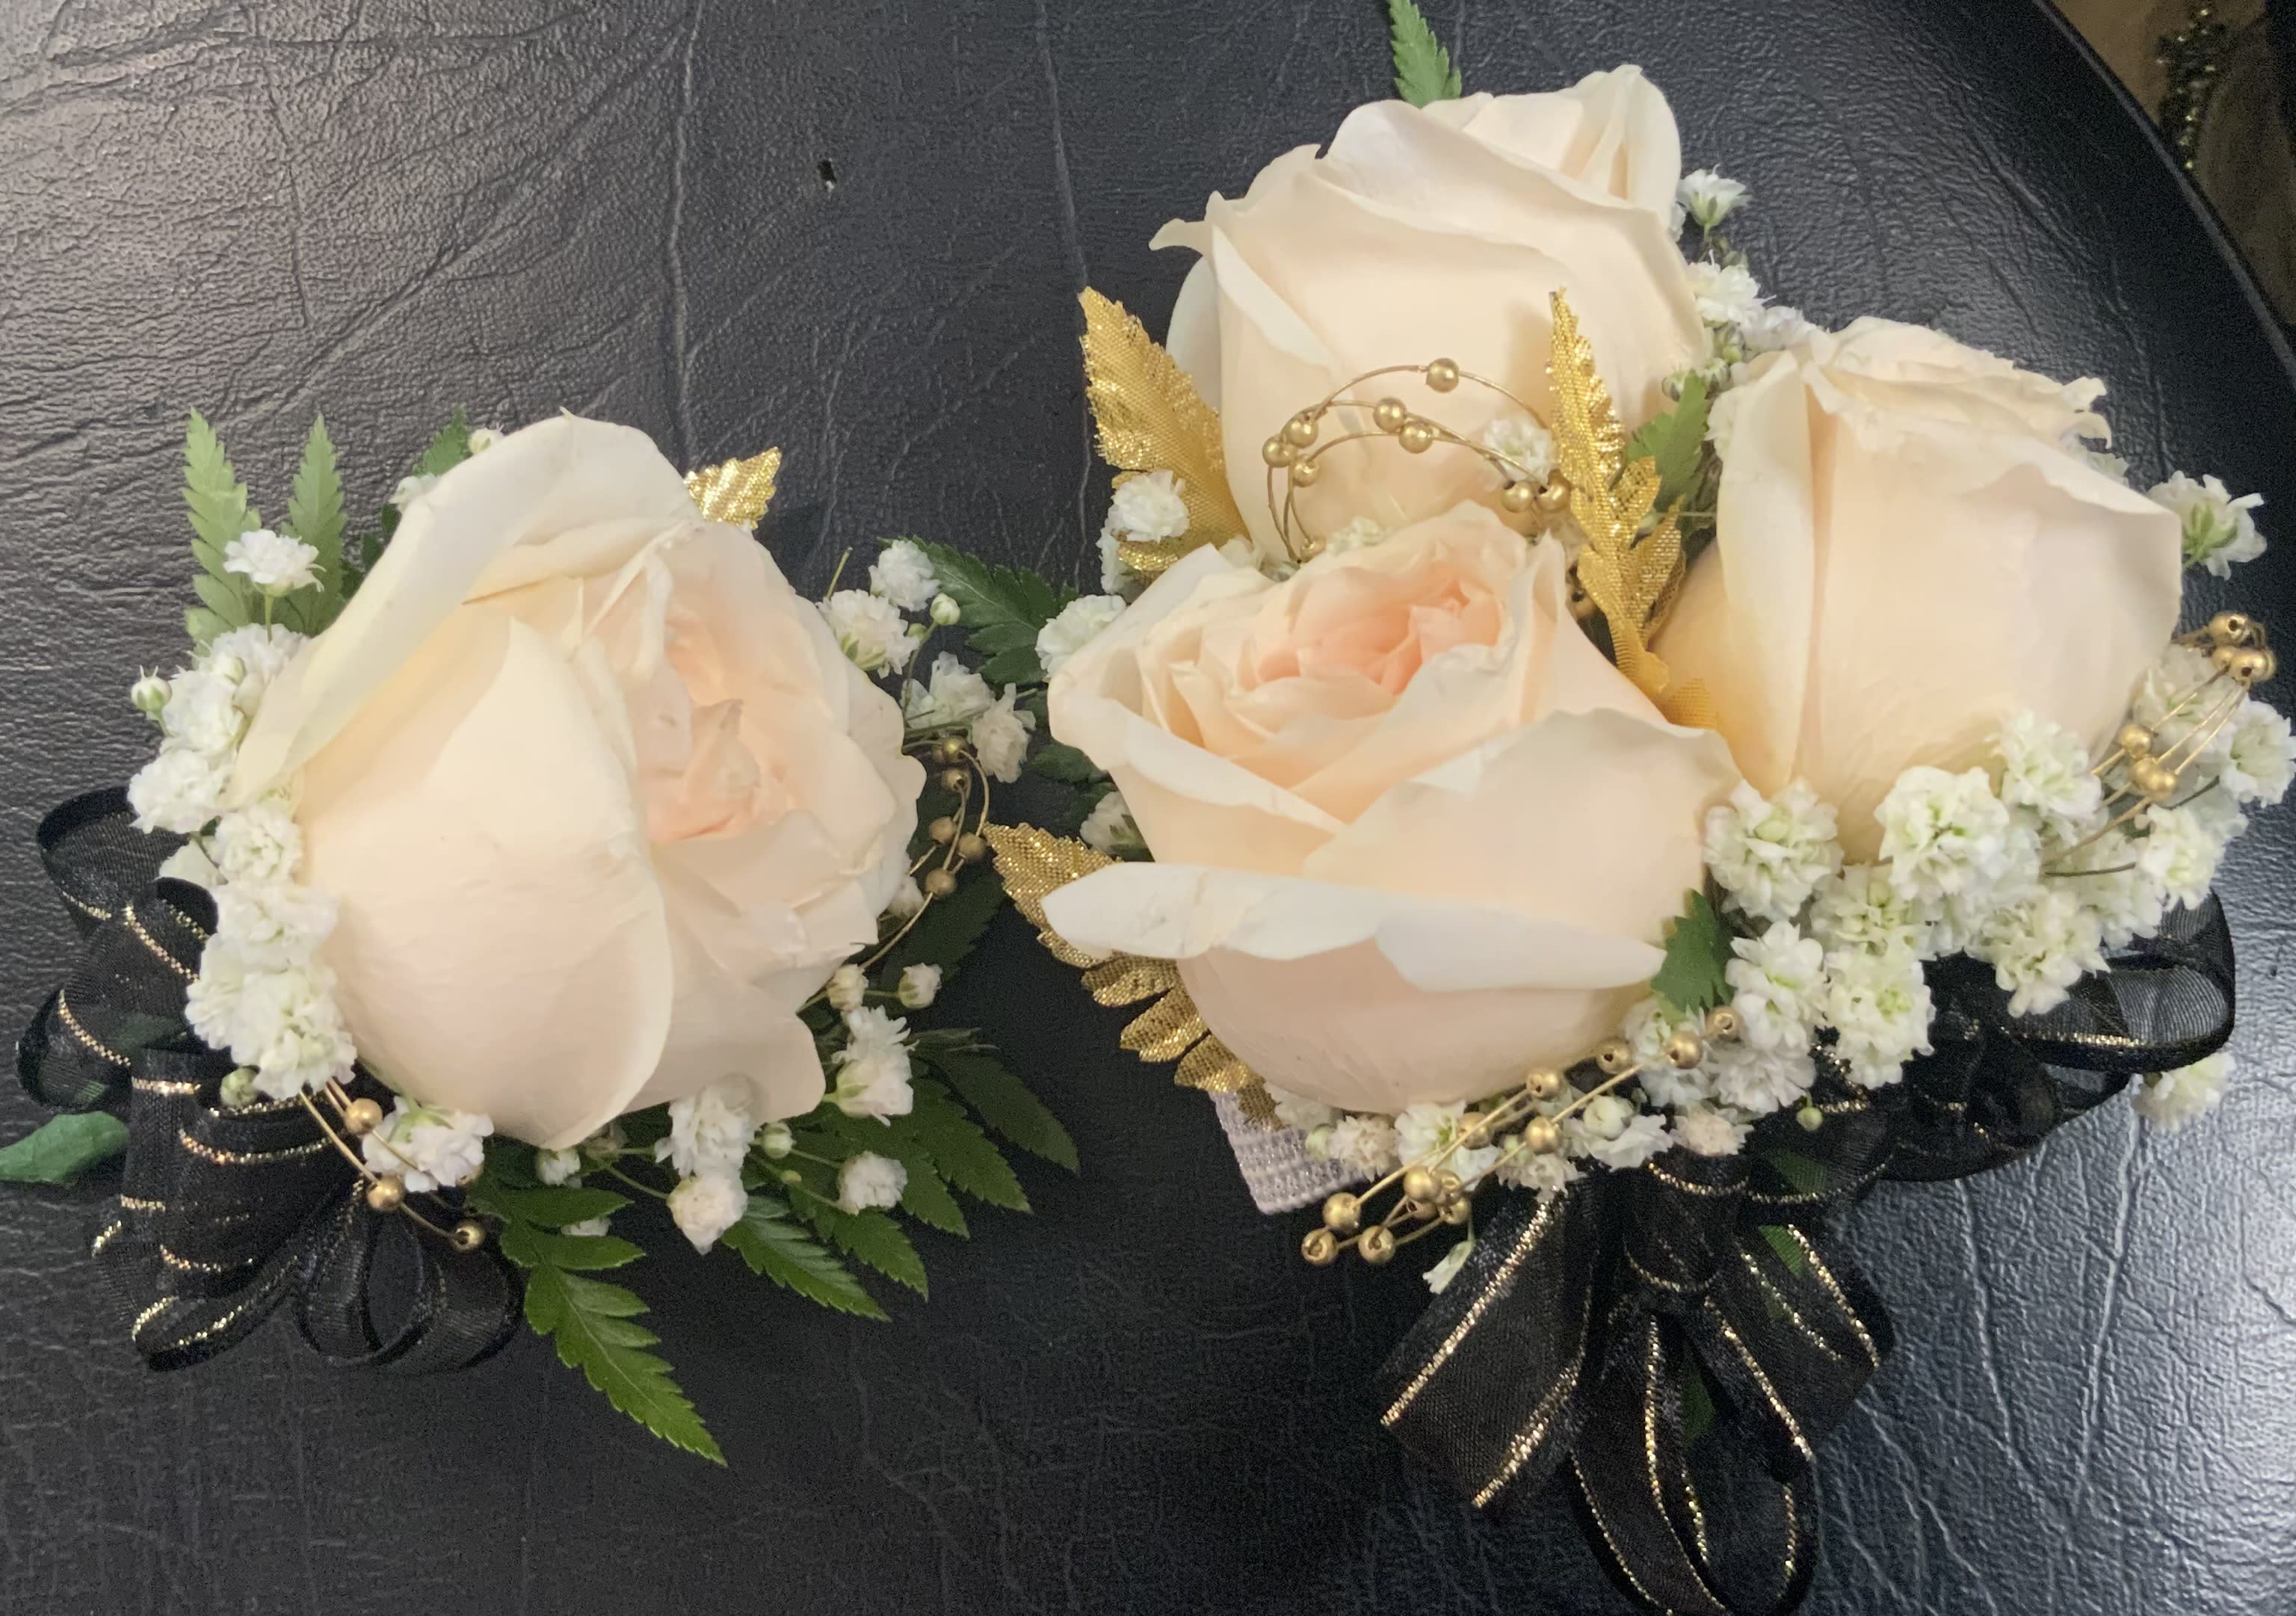 Corsage Set - It's Prom Season the perfect time to get Your Corsage. A Different Color Rose is available upon request. A Different Color Bow is available upon request. Beads available only in Gold, Silver or Pearl. Leaves Available in Silver or Gold.